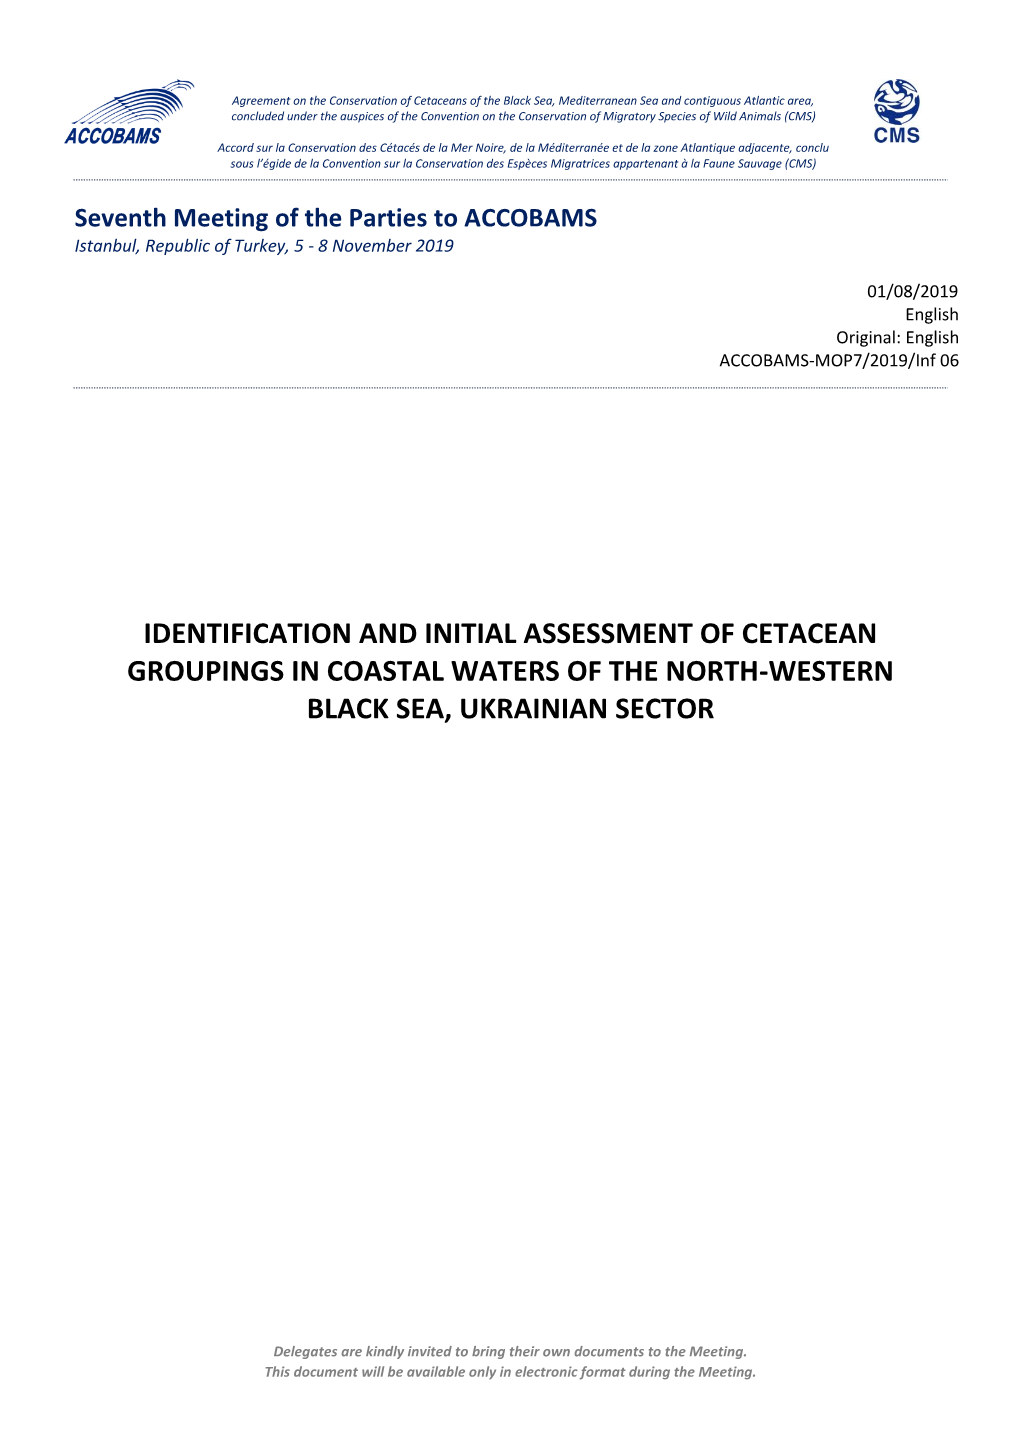 Identification and Initial Assessment of Cetacean Groupings in Coastal Waters of the North-Western Black Sea, Ukrainian Sector